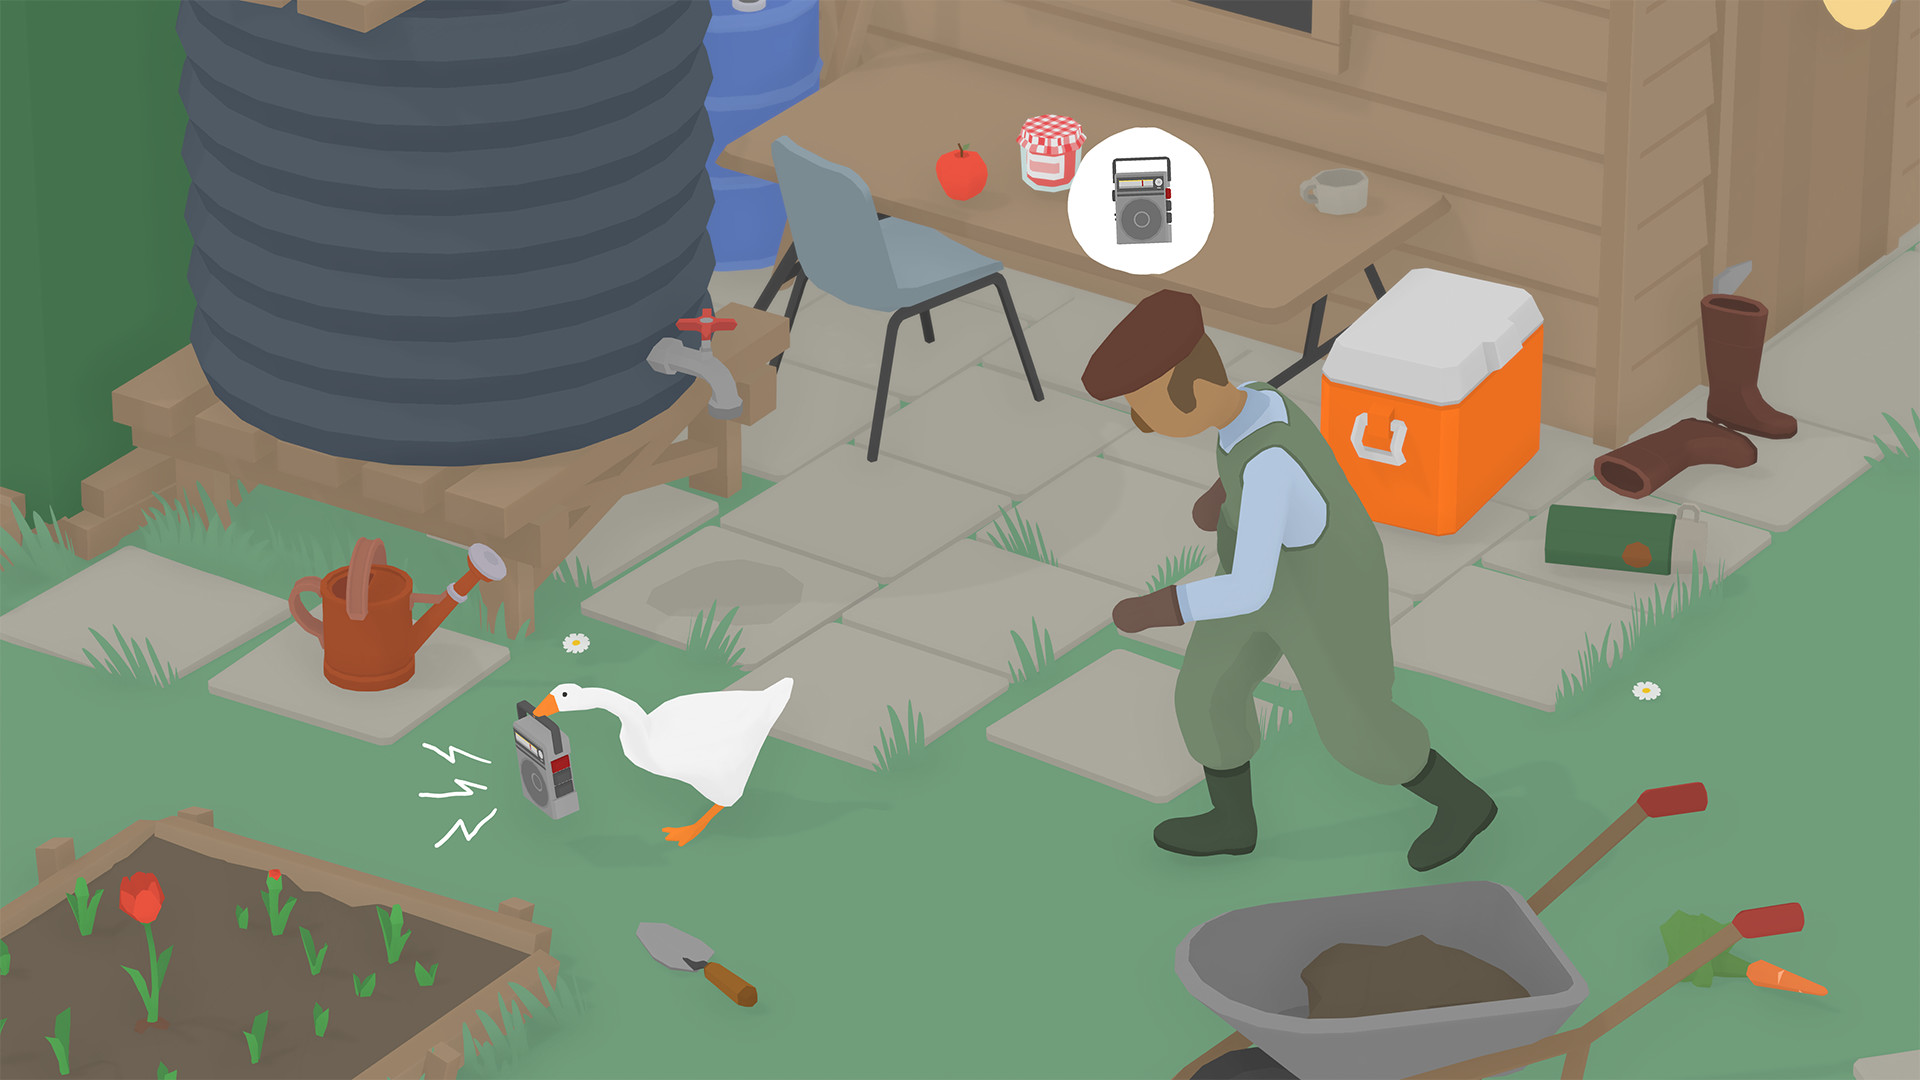 untitled goose game (PC) - Goose on the Loose! - Steam Showcase 